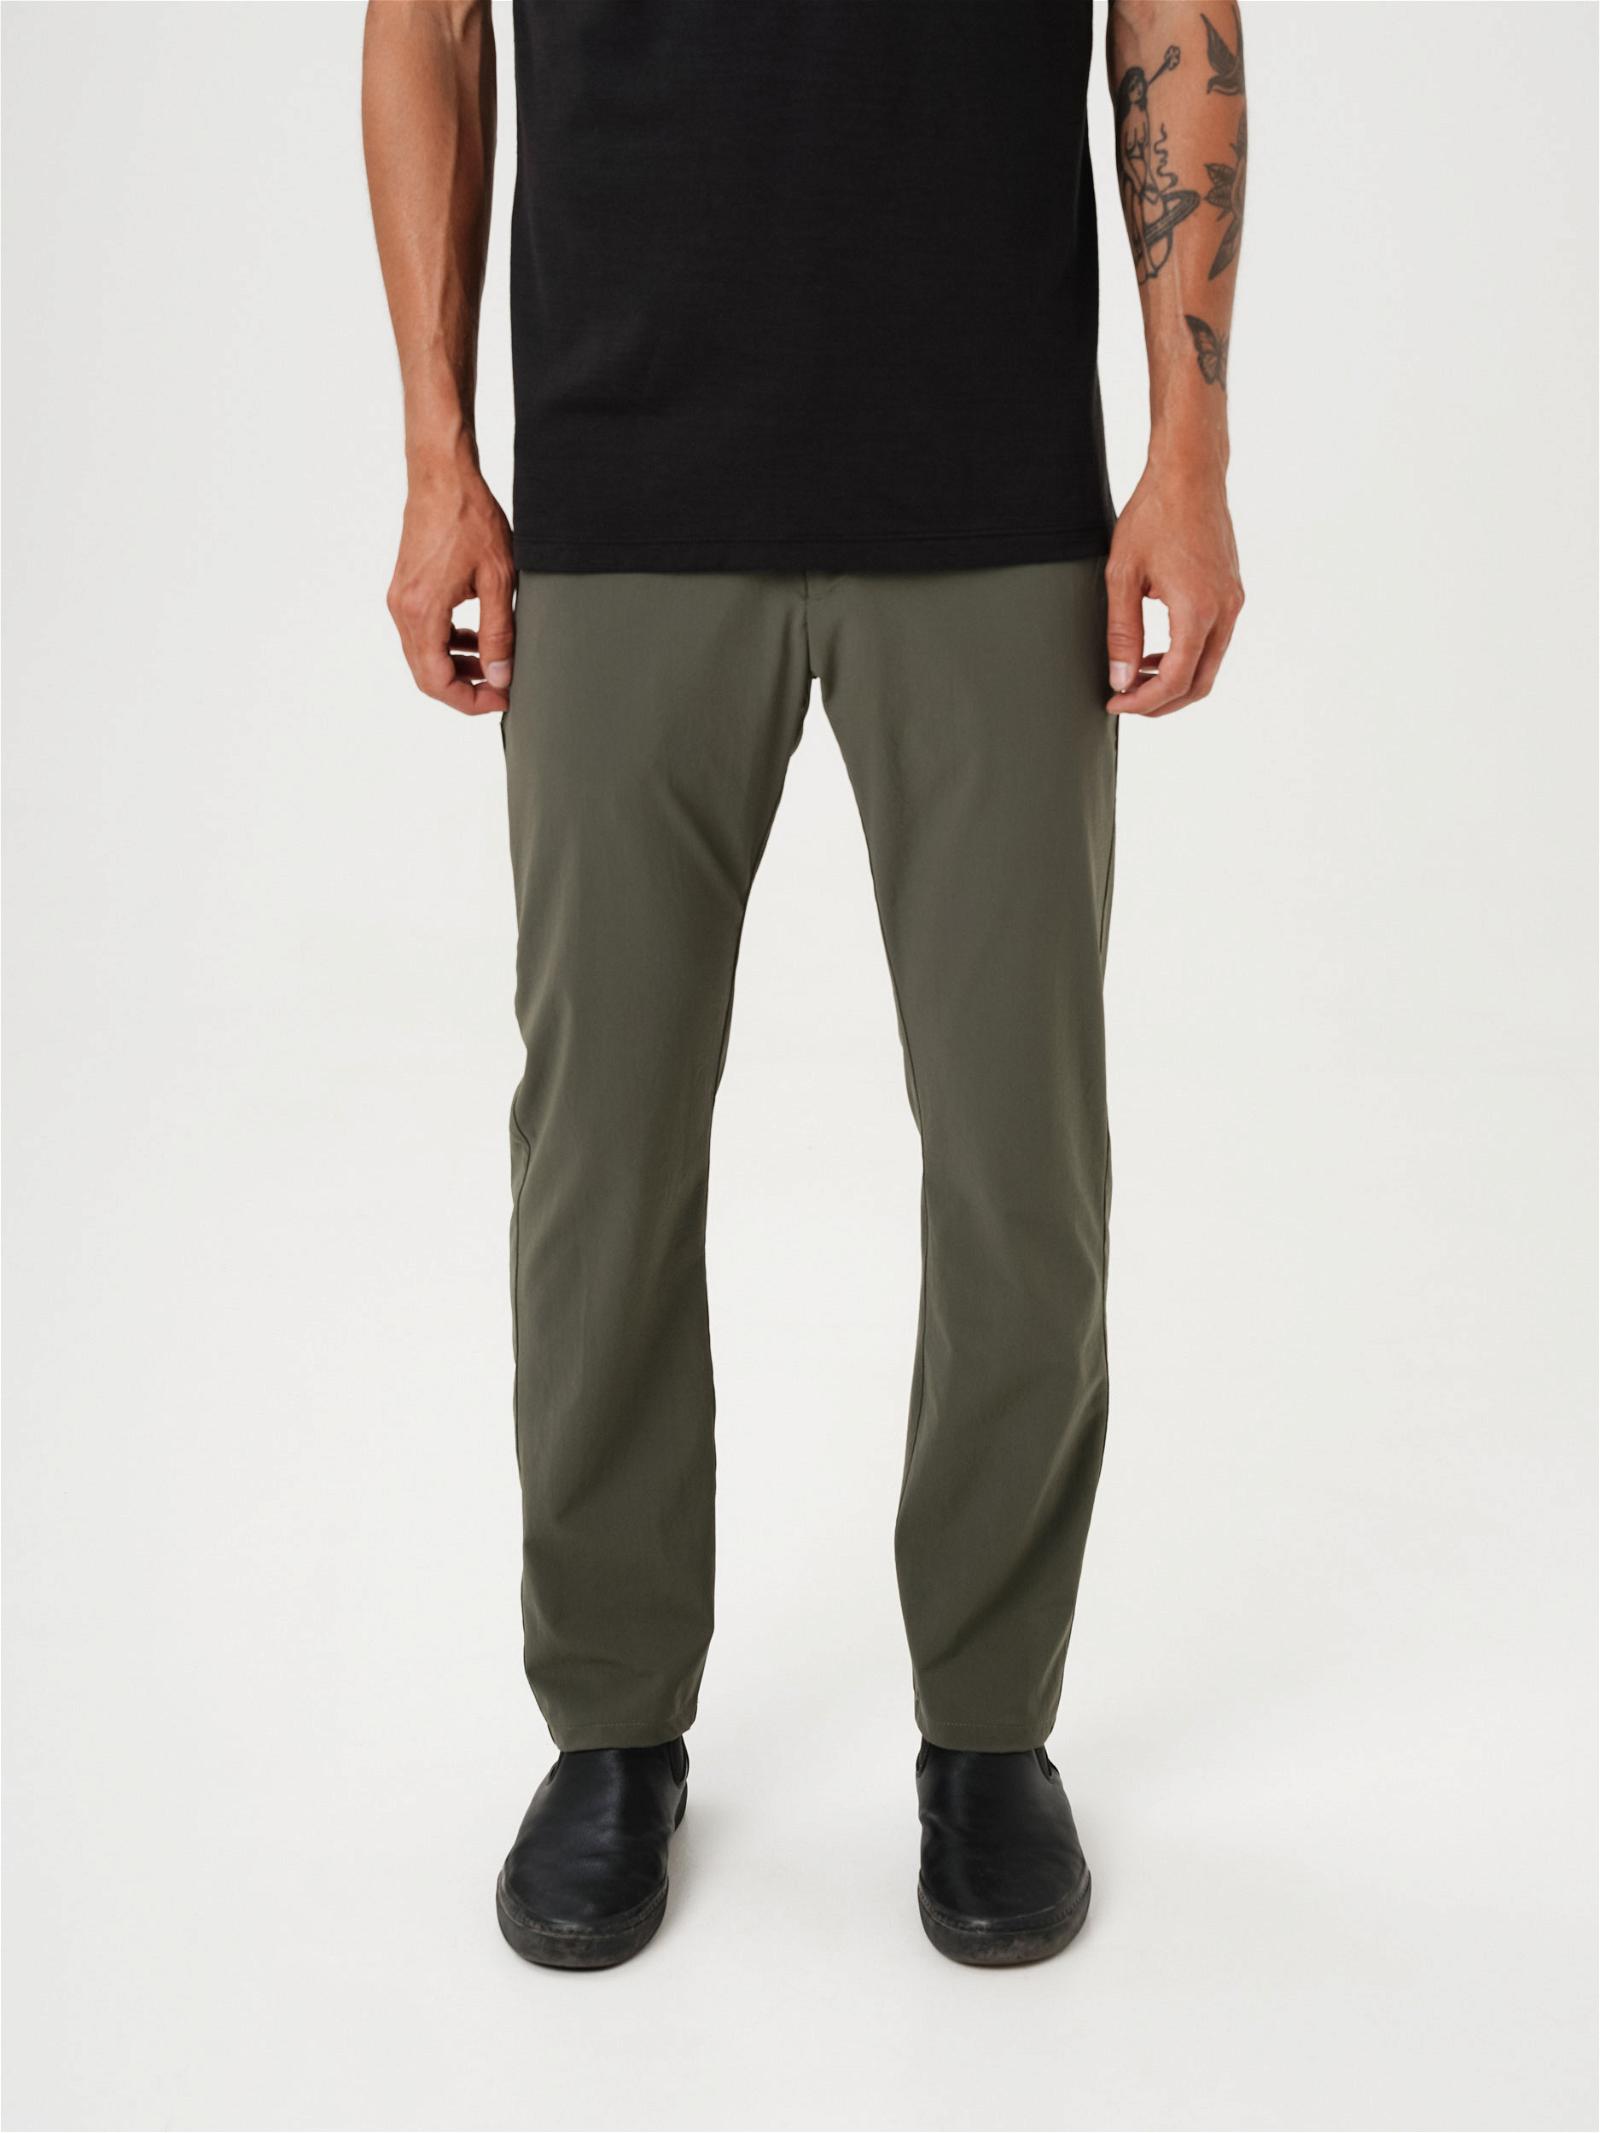 Mission Workshop Division Chino Pant